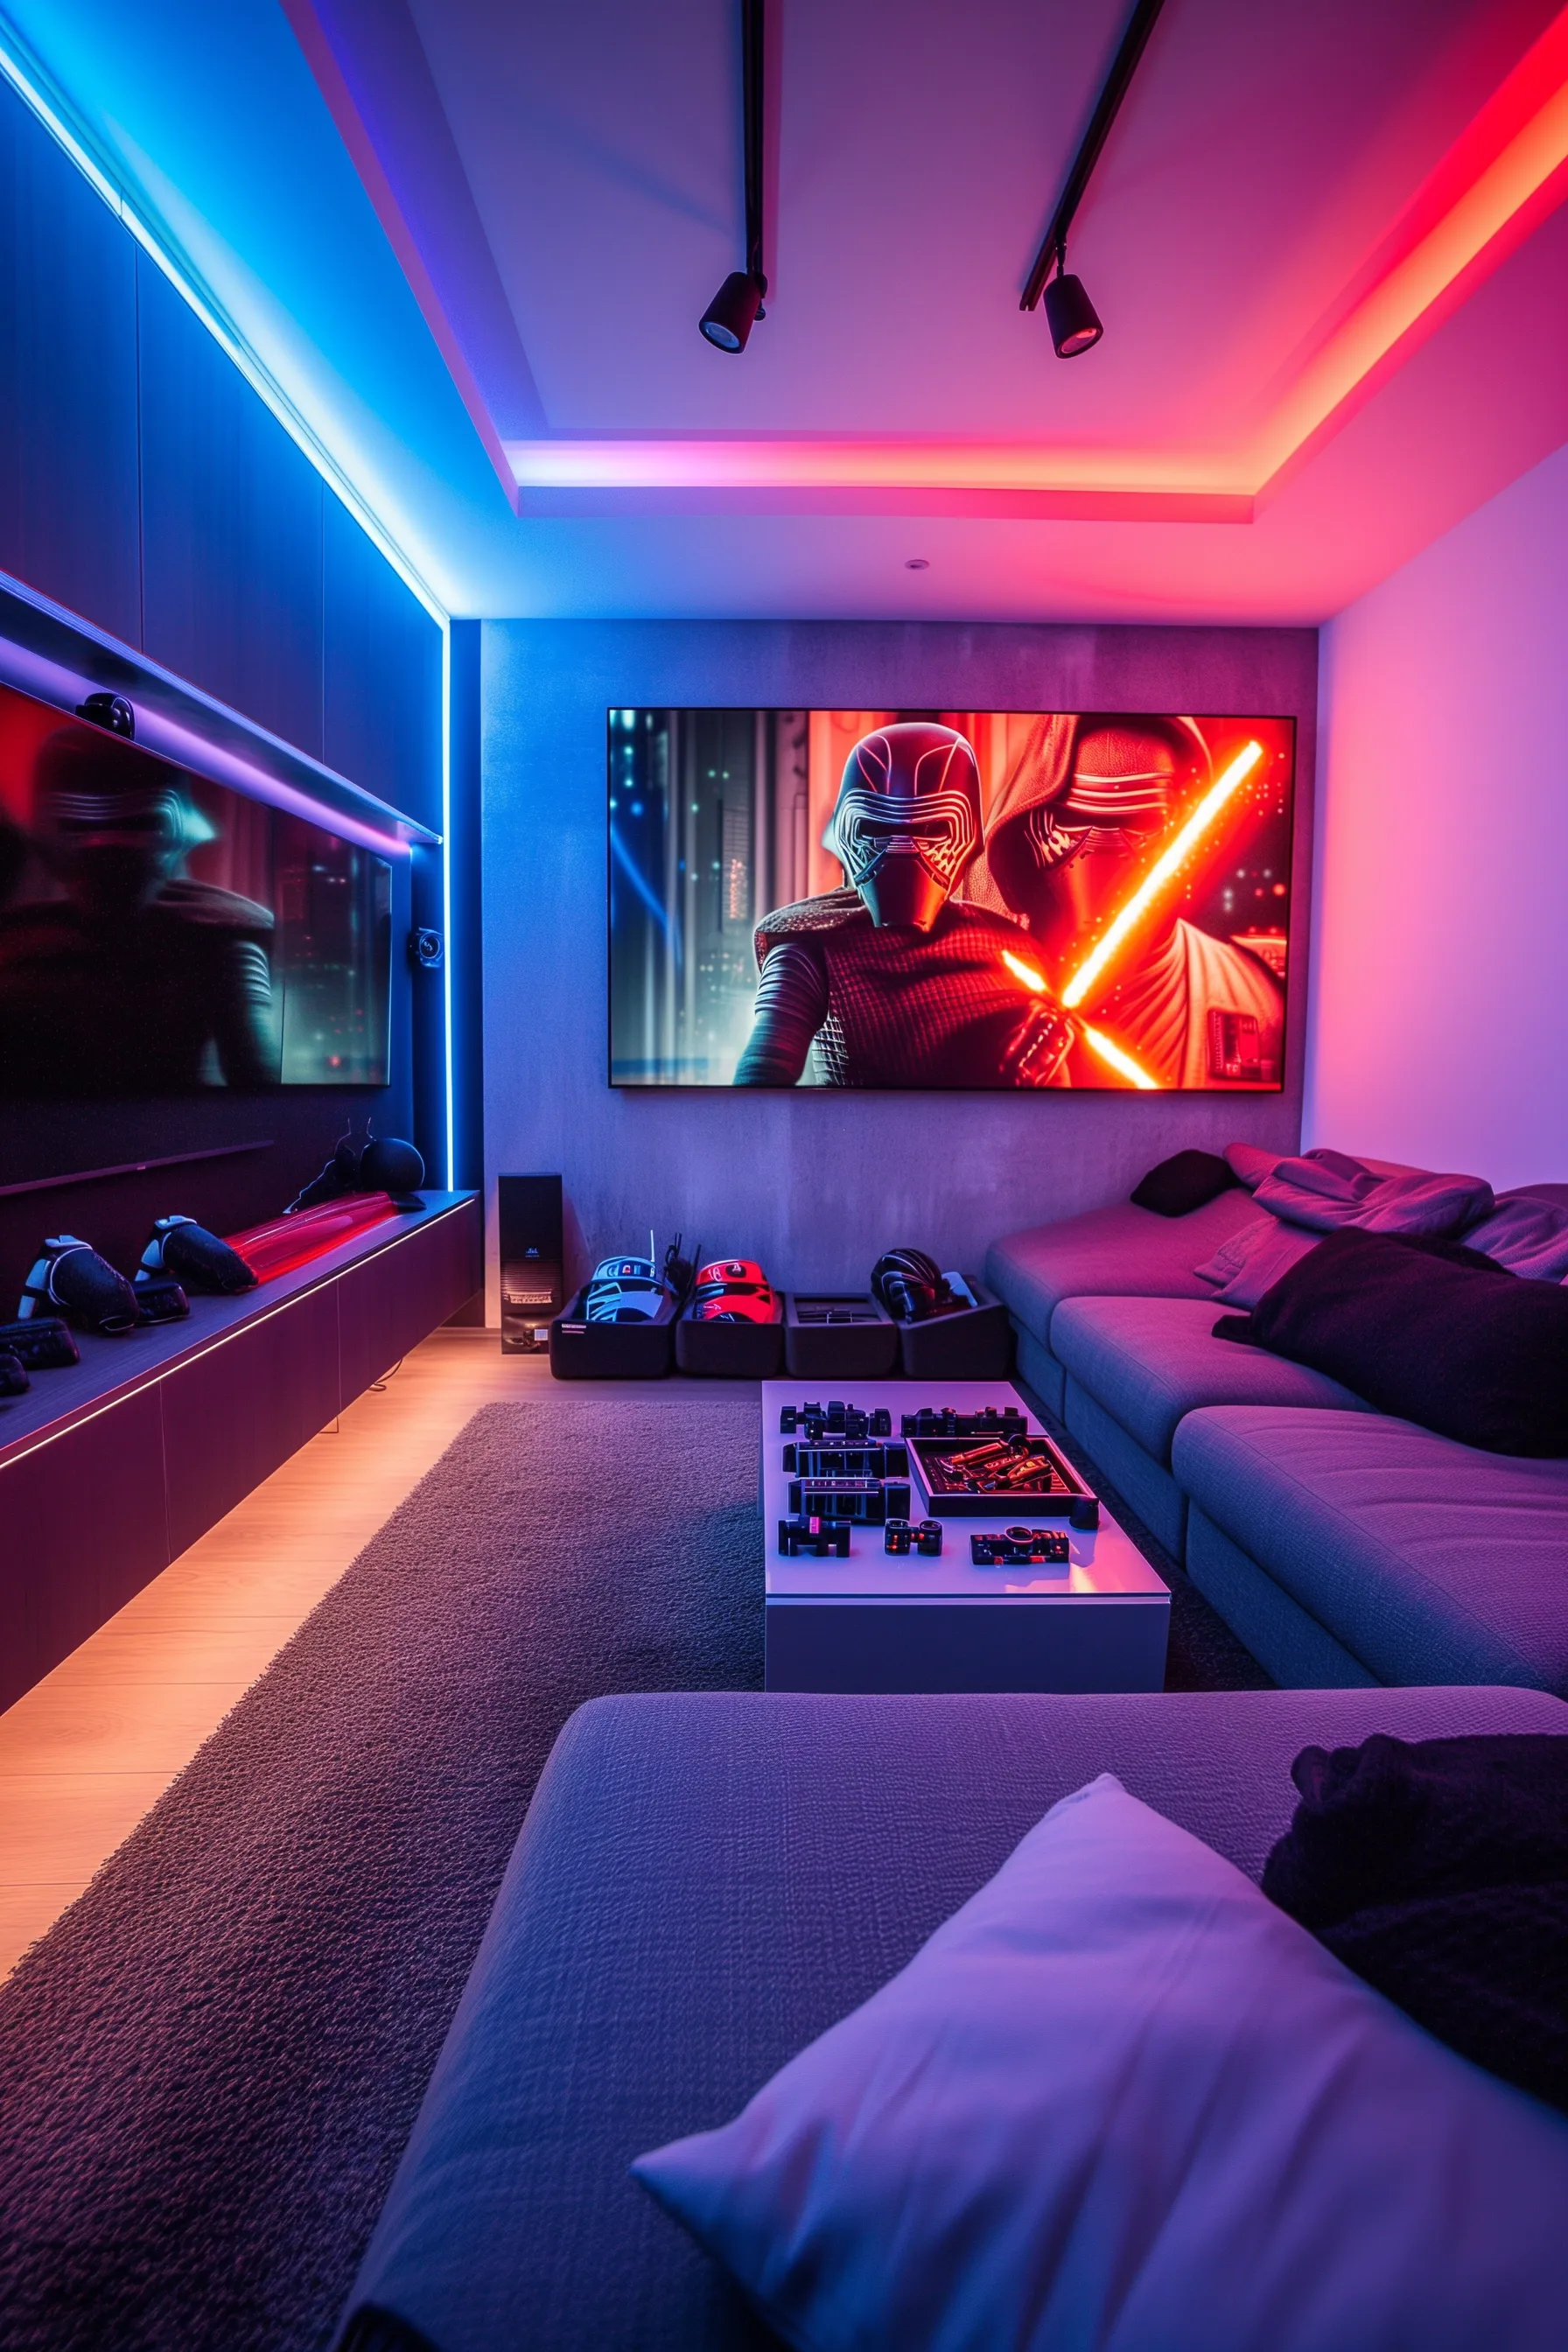 A star wars gaming room with red and orange lights